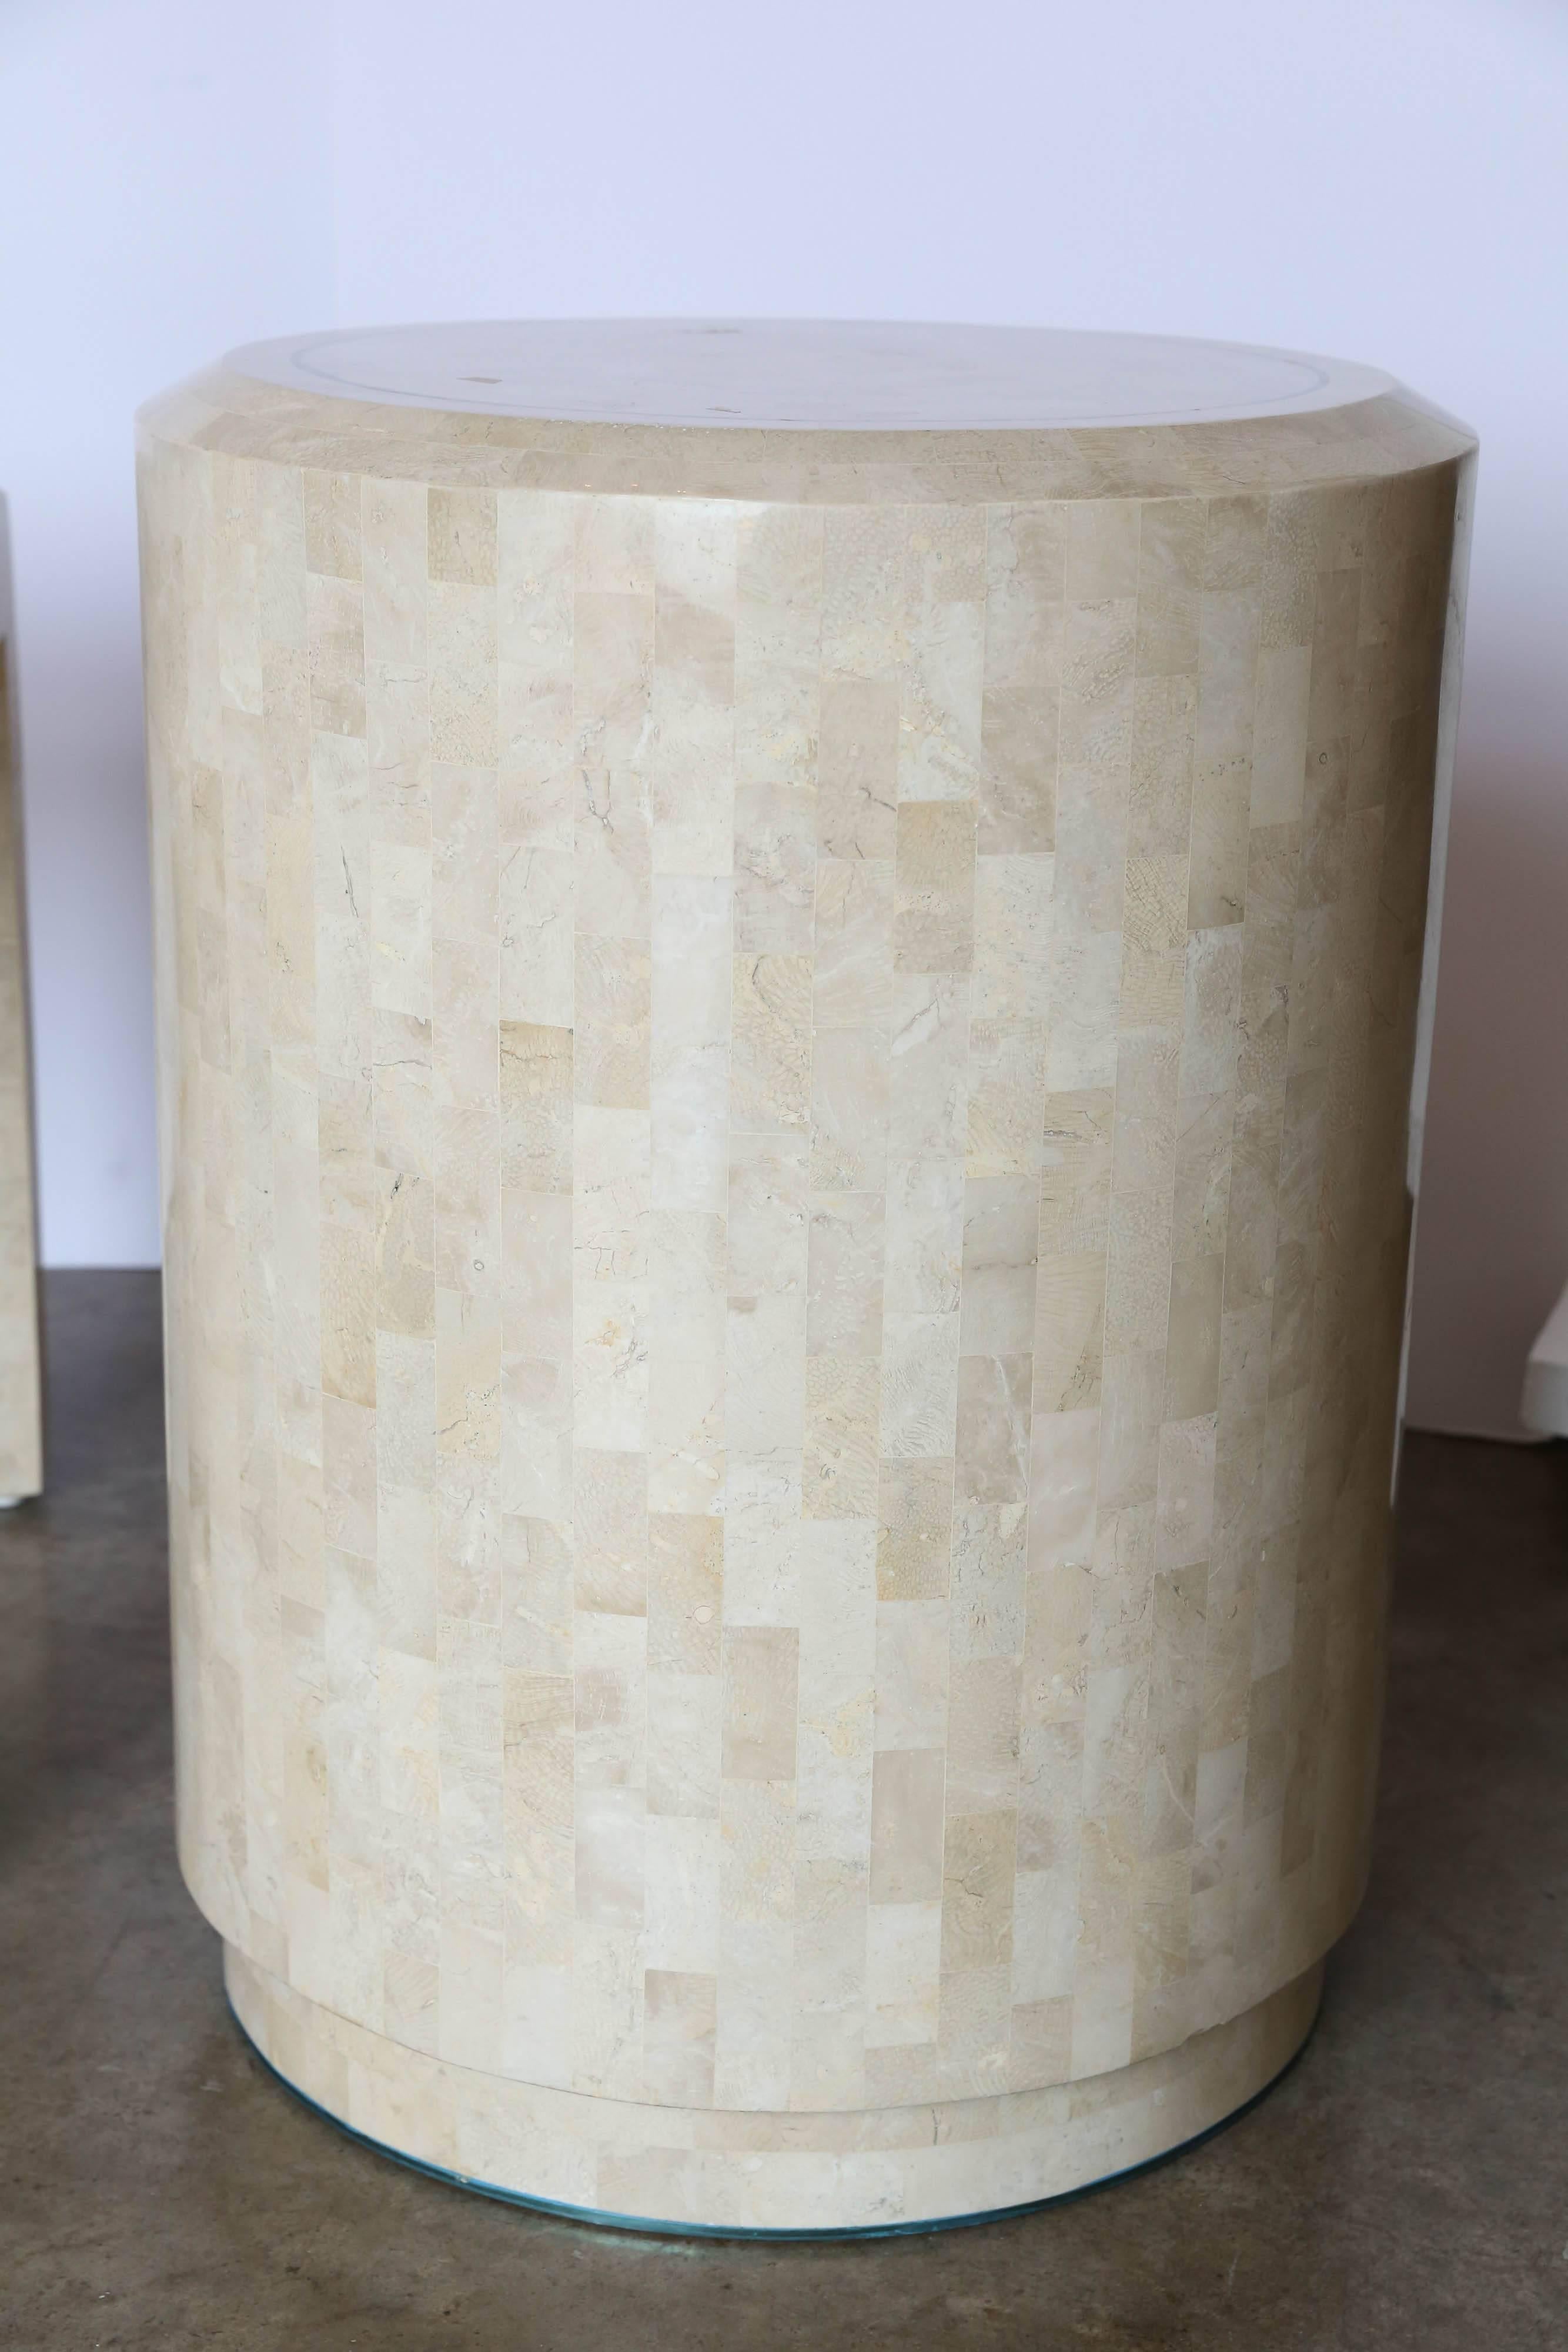 Offered are two side or end tables of ivory and tan tessellated fossilized coral with inlaid brass by Maitland-Smith. One table is circular and the other rectangular. The dimensions for the rectangular side table is: 27.0